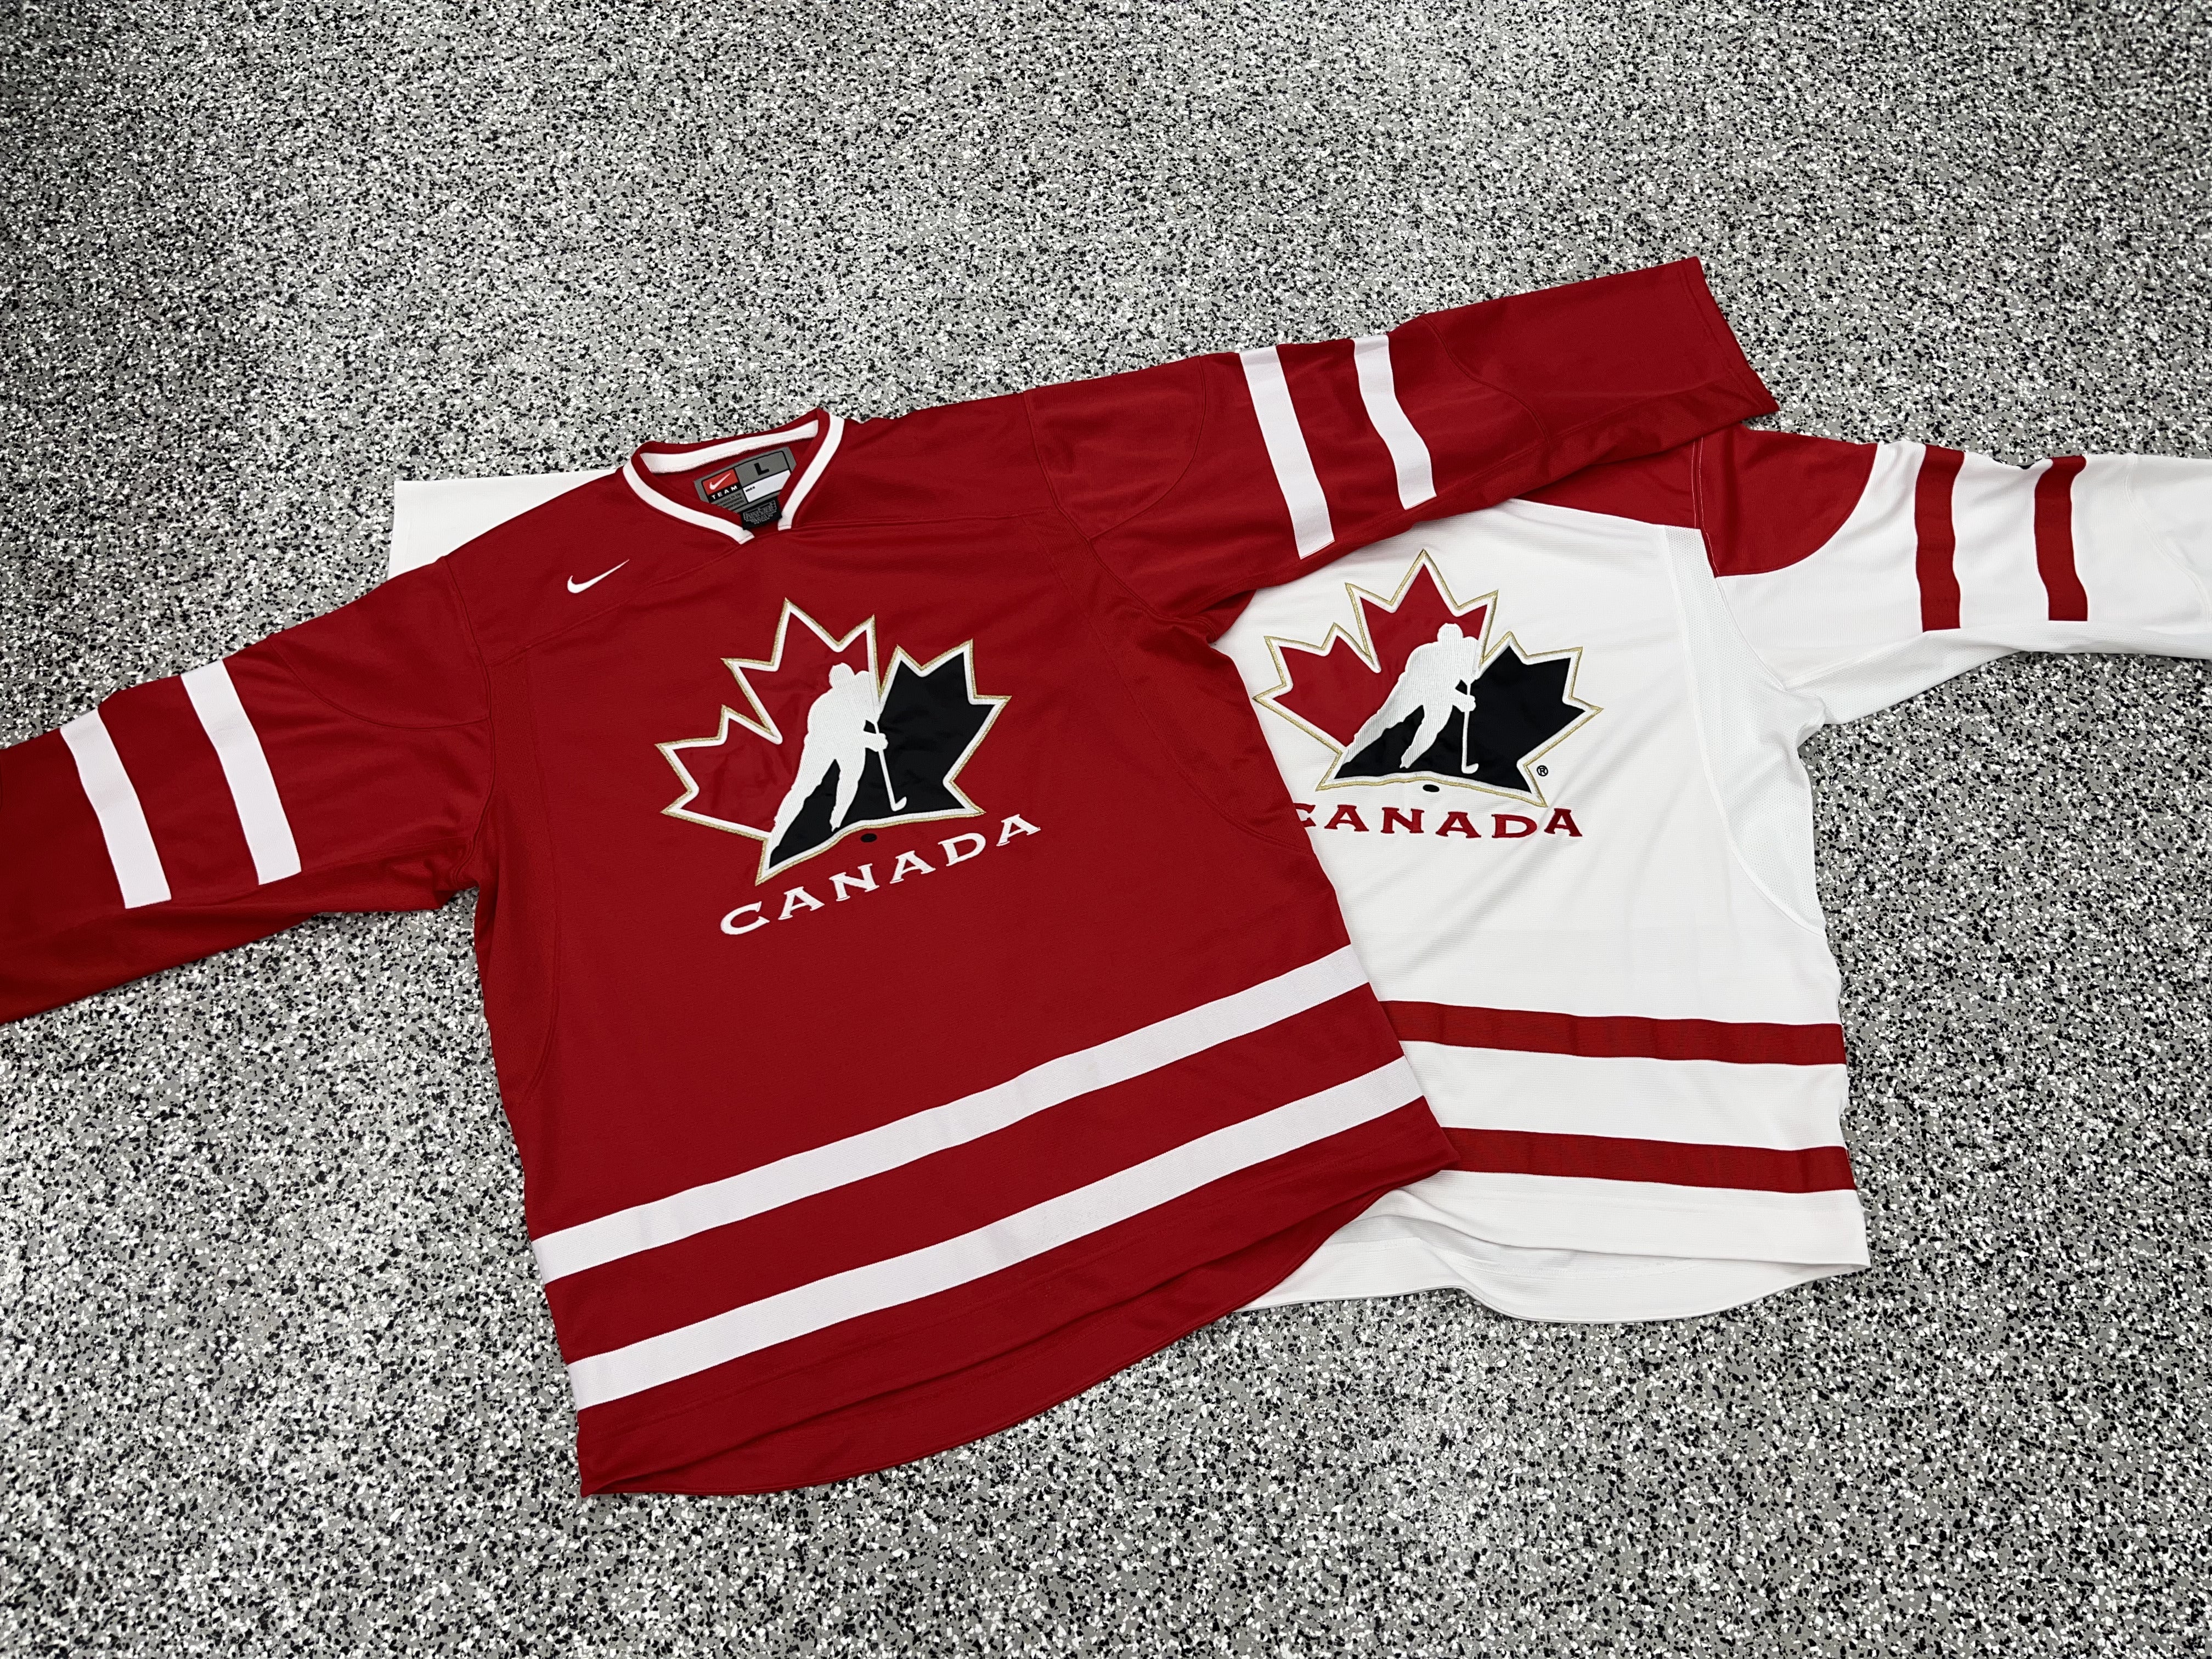 Nike Team Canada Hockey Jersey 2010 Vancouver Home Jersey Men's Large